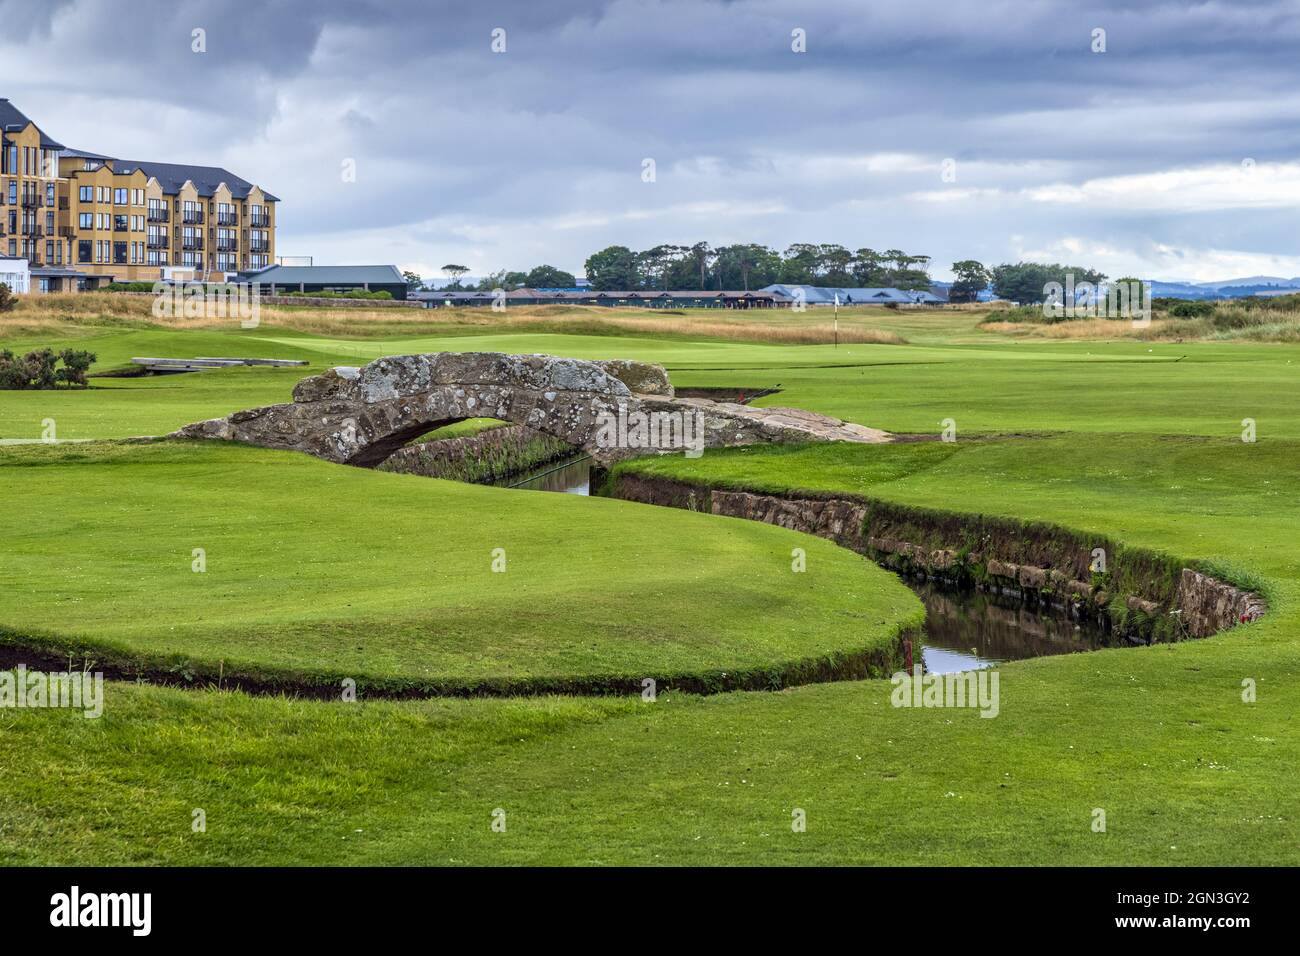 The famous Swilken (or Swilcan) Bridge over Swilken Burn between the first and eighteenth fairways of the Old Course at St Andrews in Fife, Scotland. Stock Photo